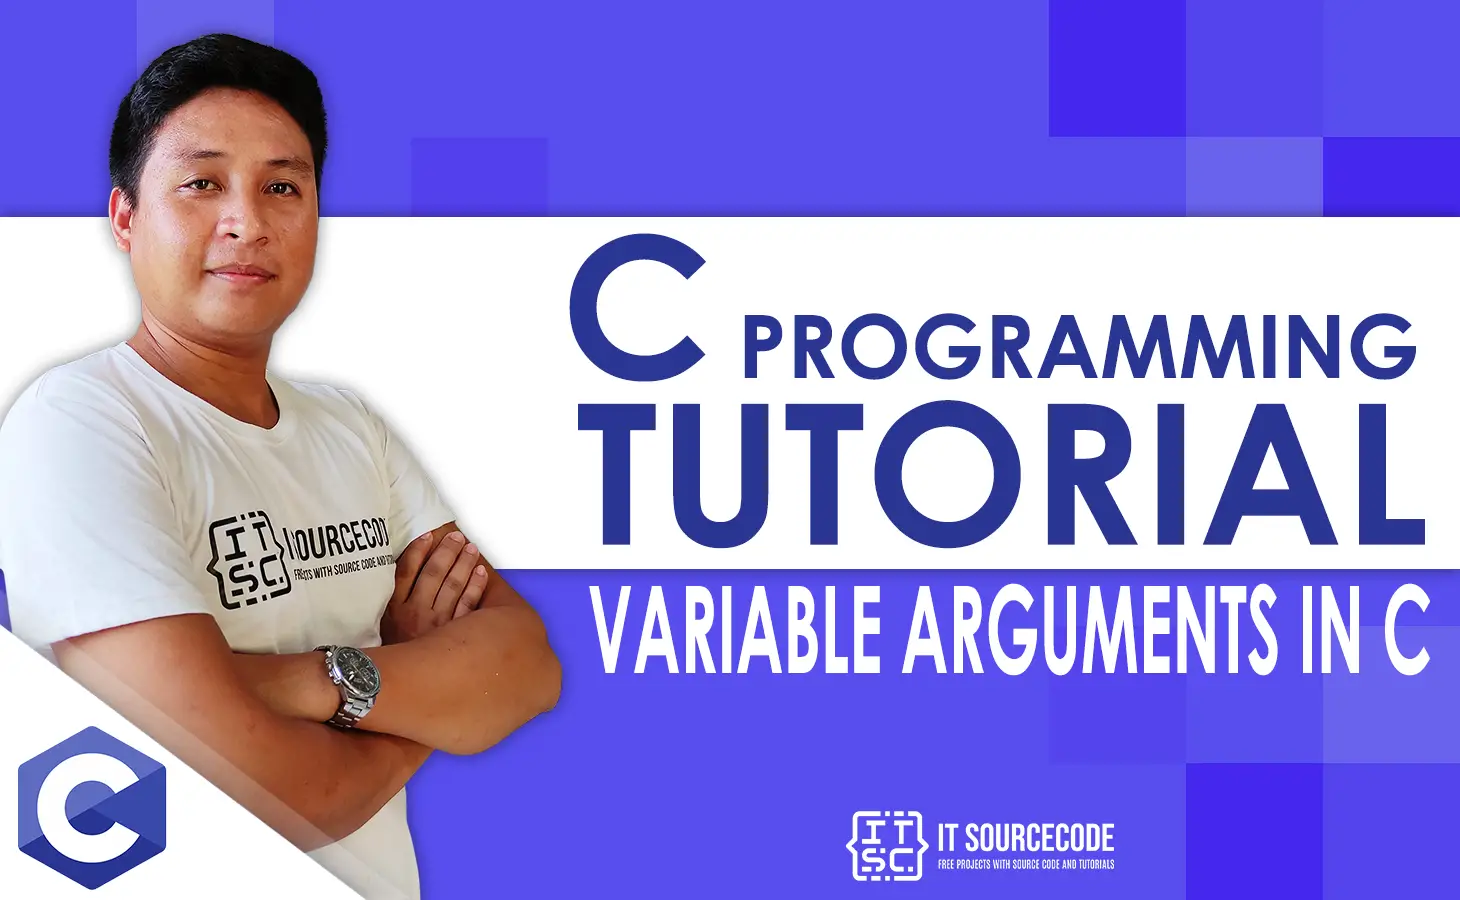 VARIABLE ARGUMENTS IN C